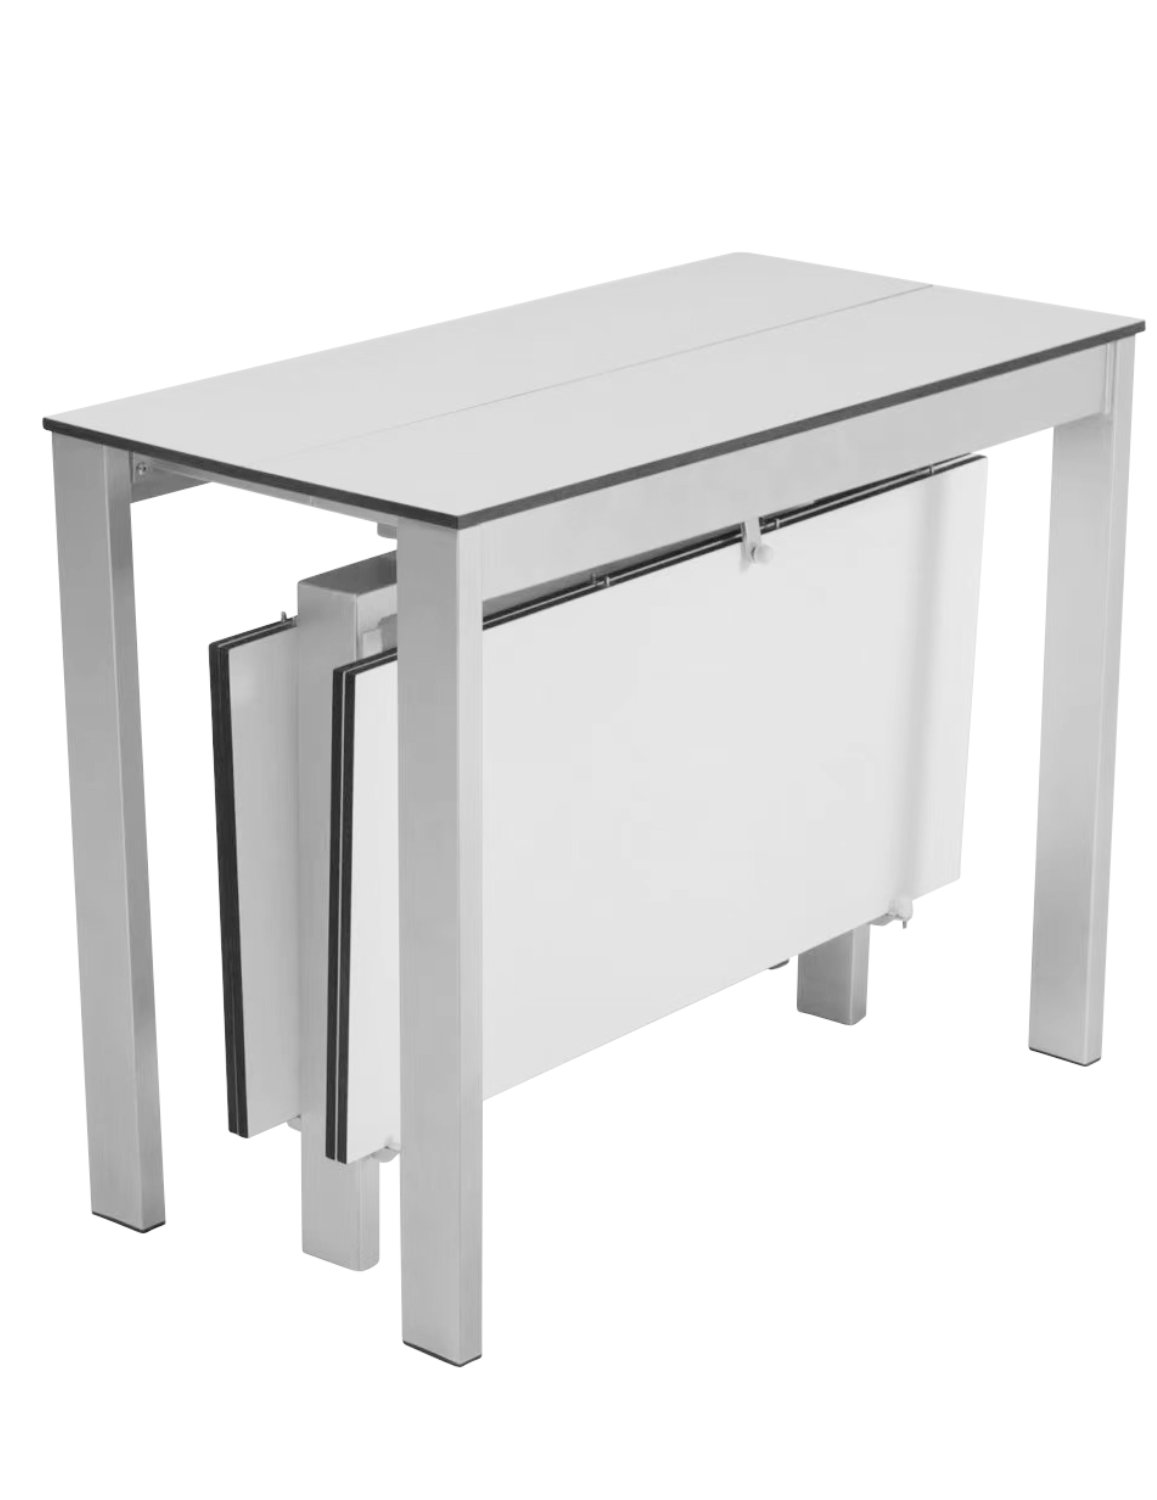 https://expandfurniture.com/wp-content/uploads/2021/05/Outdoor-Gigante-Transformer-Table-weatherproof-extending-table-in-white.jpg